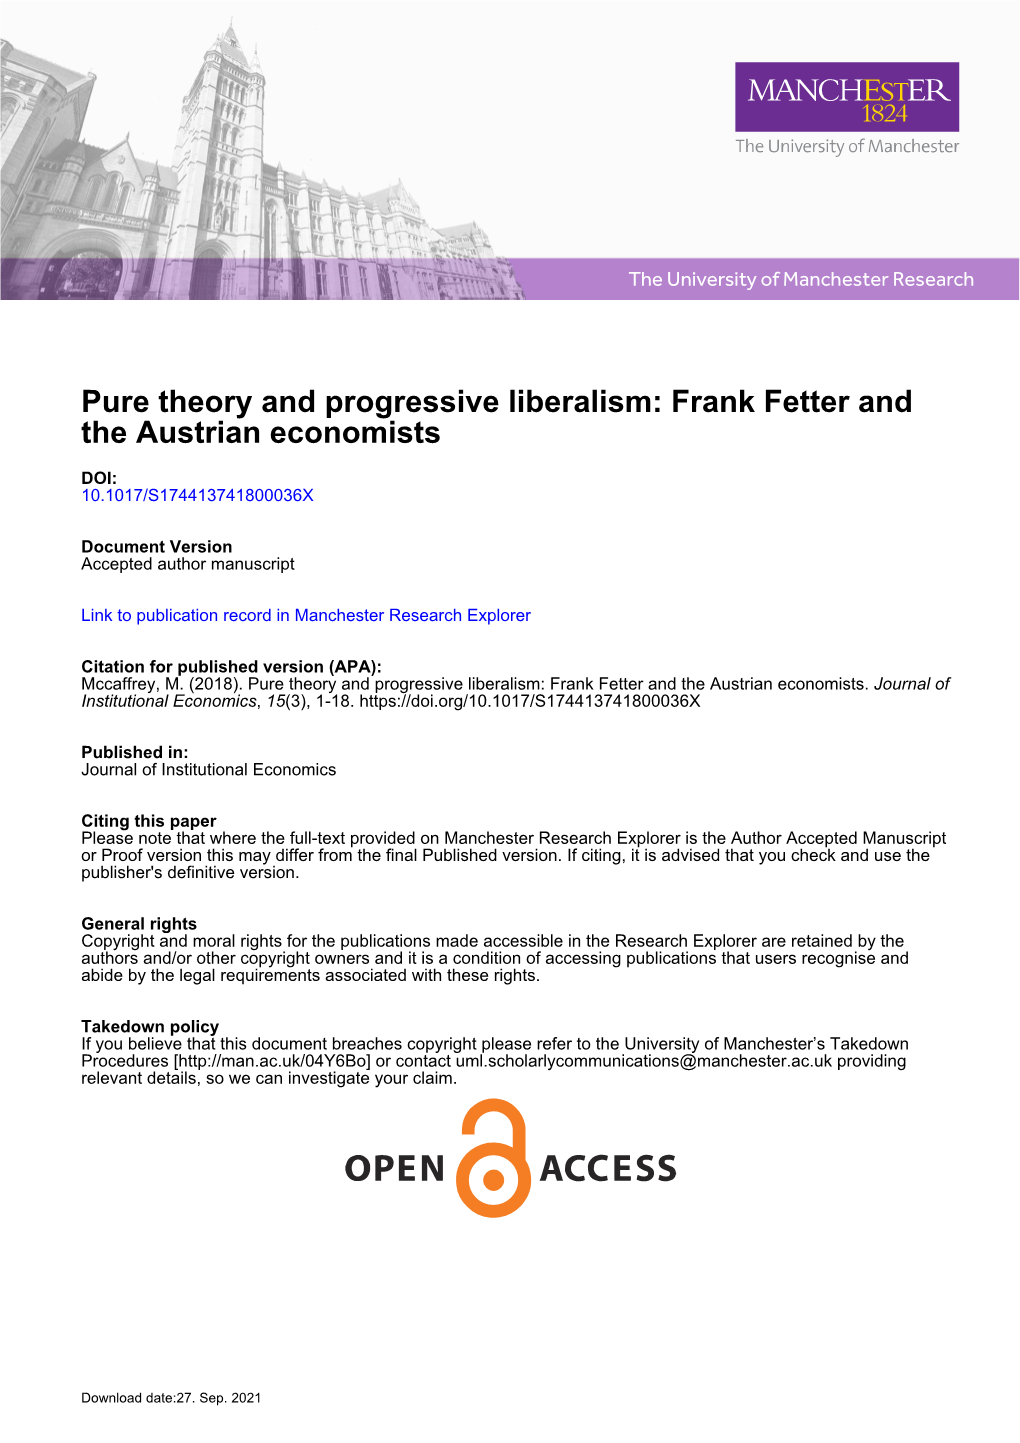 Pure Theory and Progressive Liberalism: Frank Fetter and the Austrian Economists